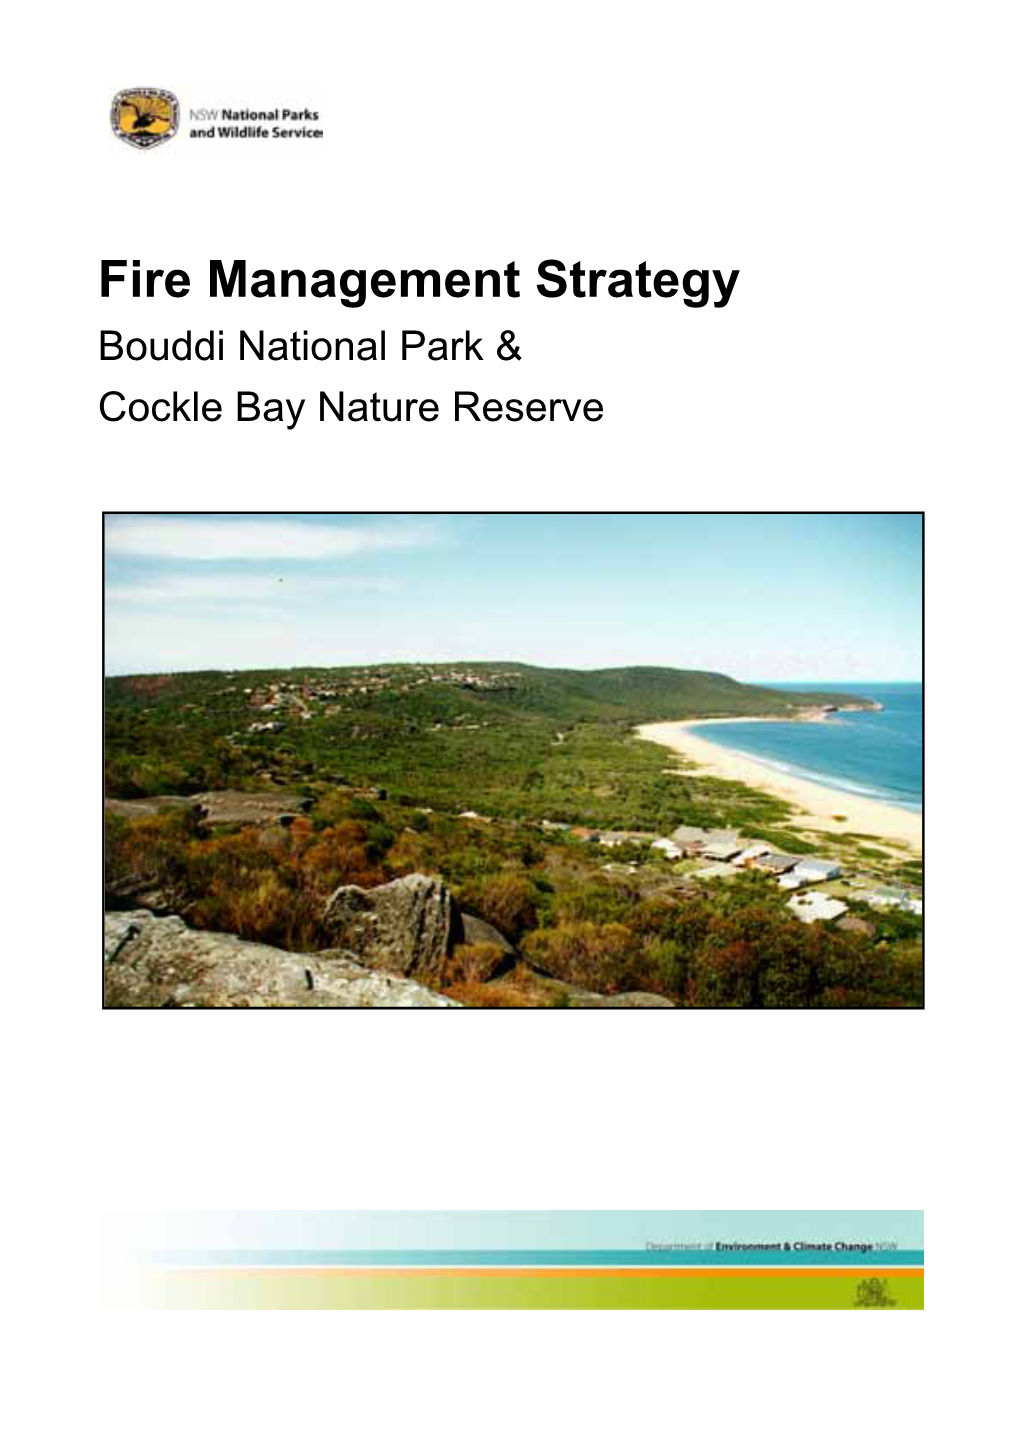 Bouddi National Park and Cockle Bay Nature Reserve Fire Management